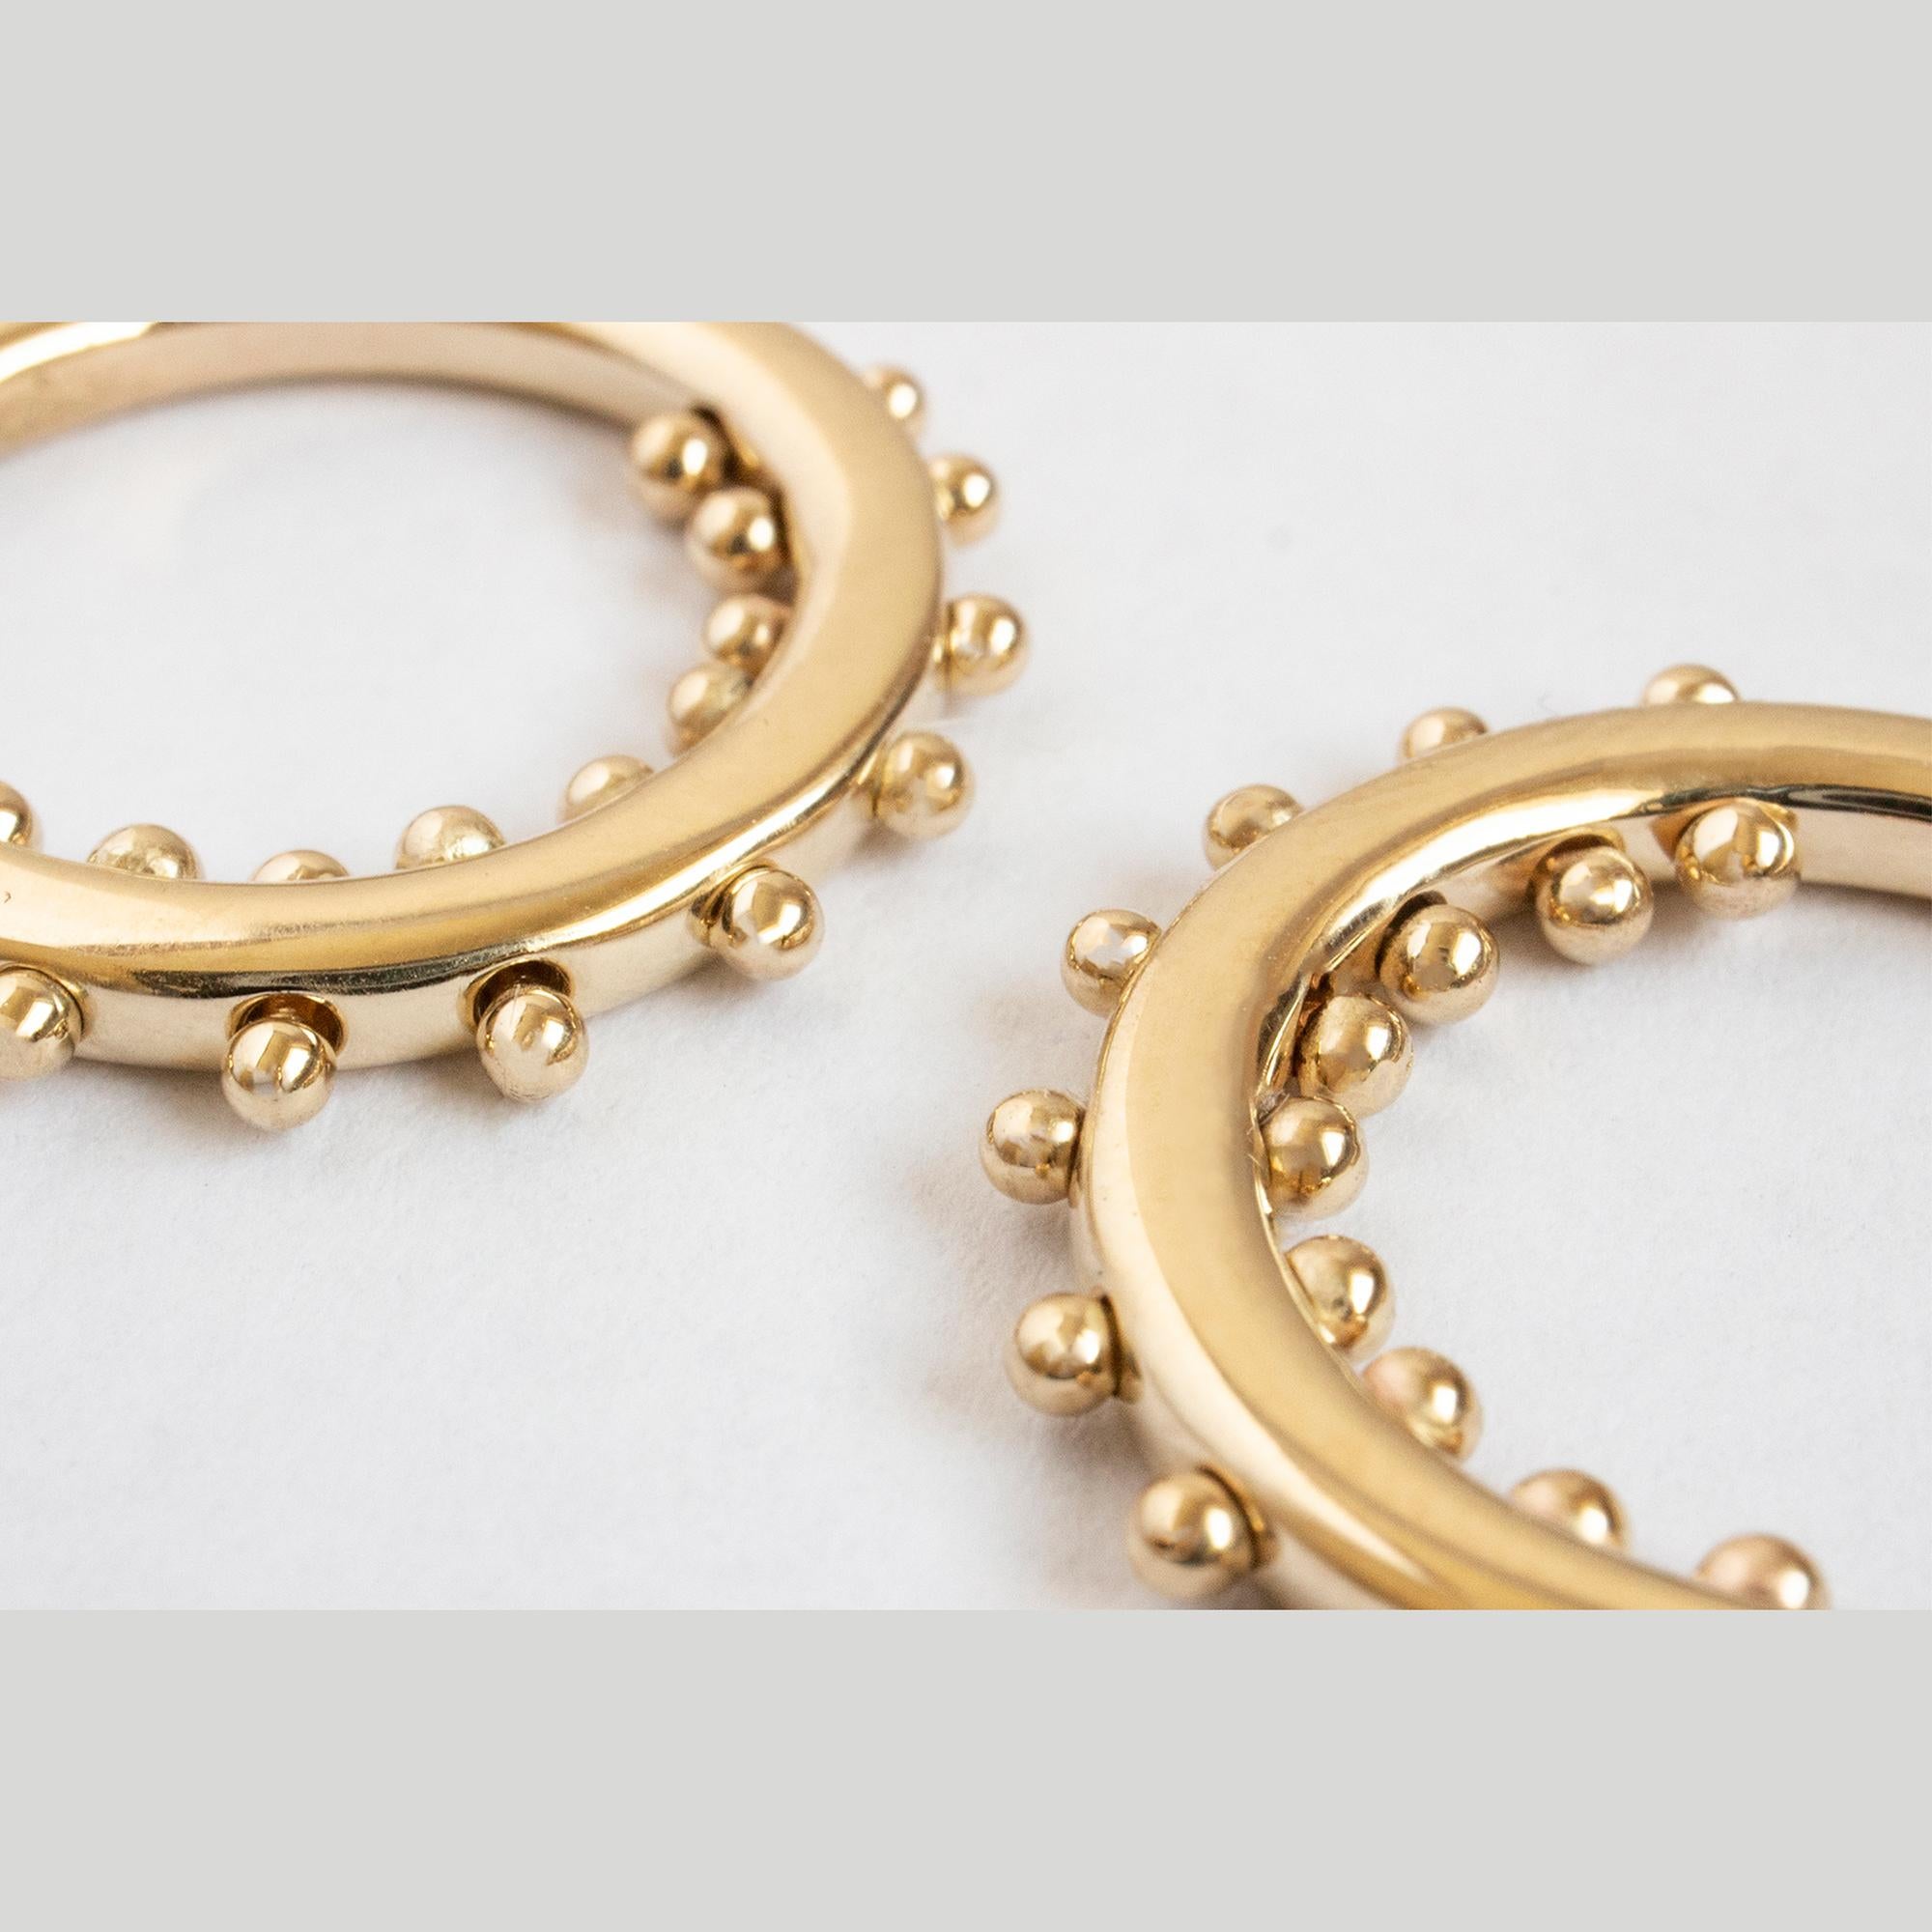 Here, beaded elements reminiscent of the ancient technique of granulation. The beads create an eye-catching update on your classic hoop.

14K YELLOW GOLD PAIR
READY TO SHIP

MATERIAL
◘  2mm wide hoop, 16mm outside diameter
◘  9x hand-balled beads